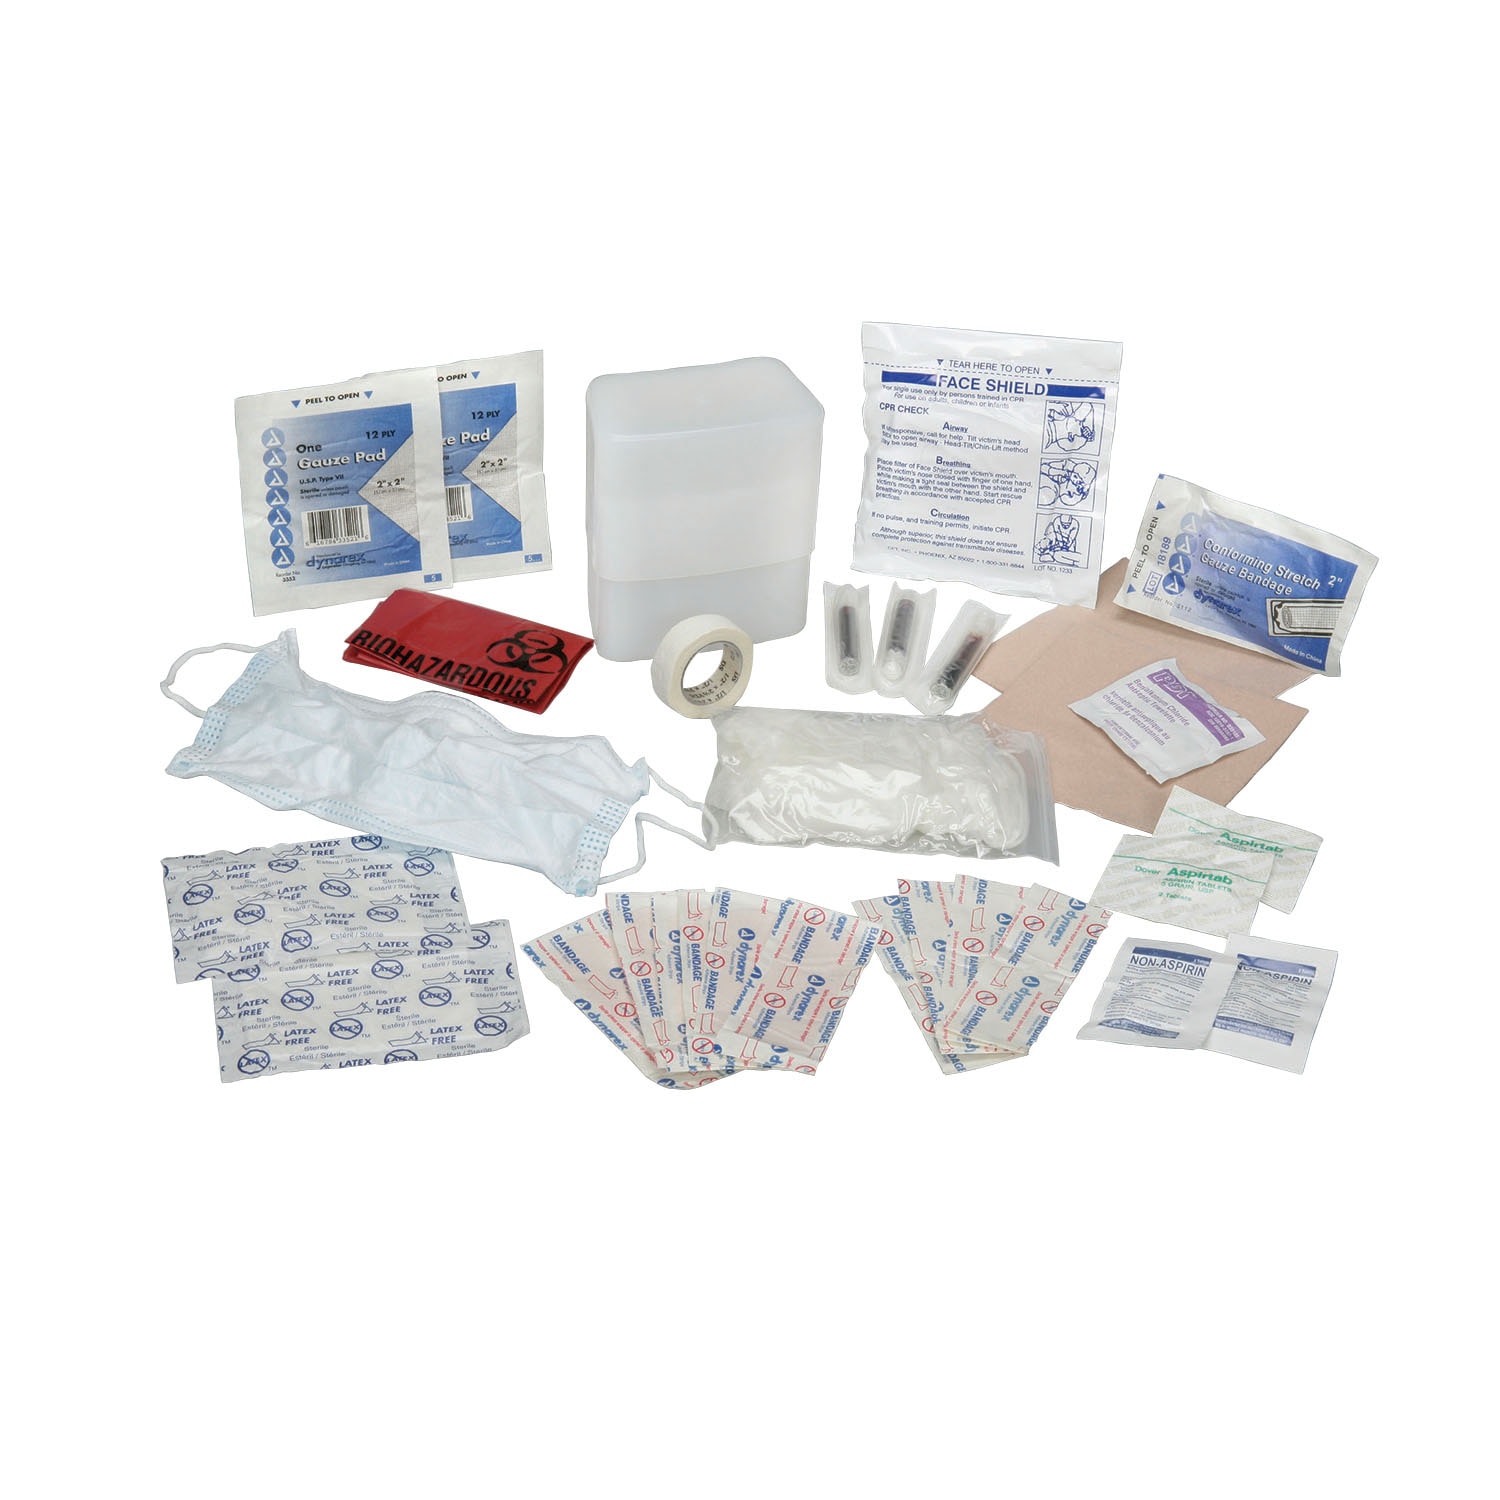 Kit, First Aid, General Purpose Use, 3-1/2" x 3-1/2" x 1-3/4"